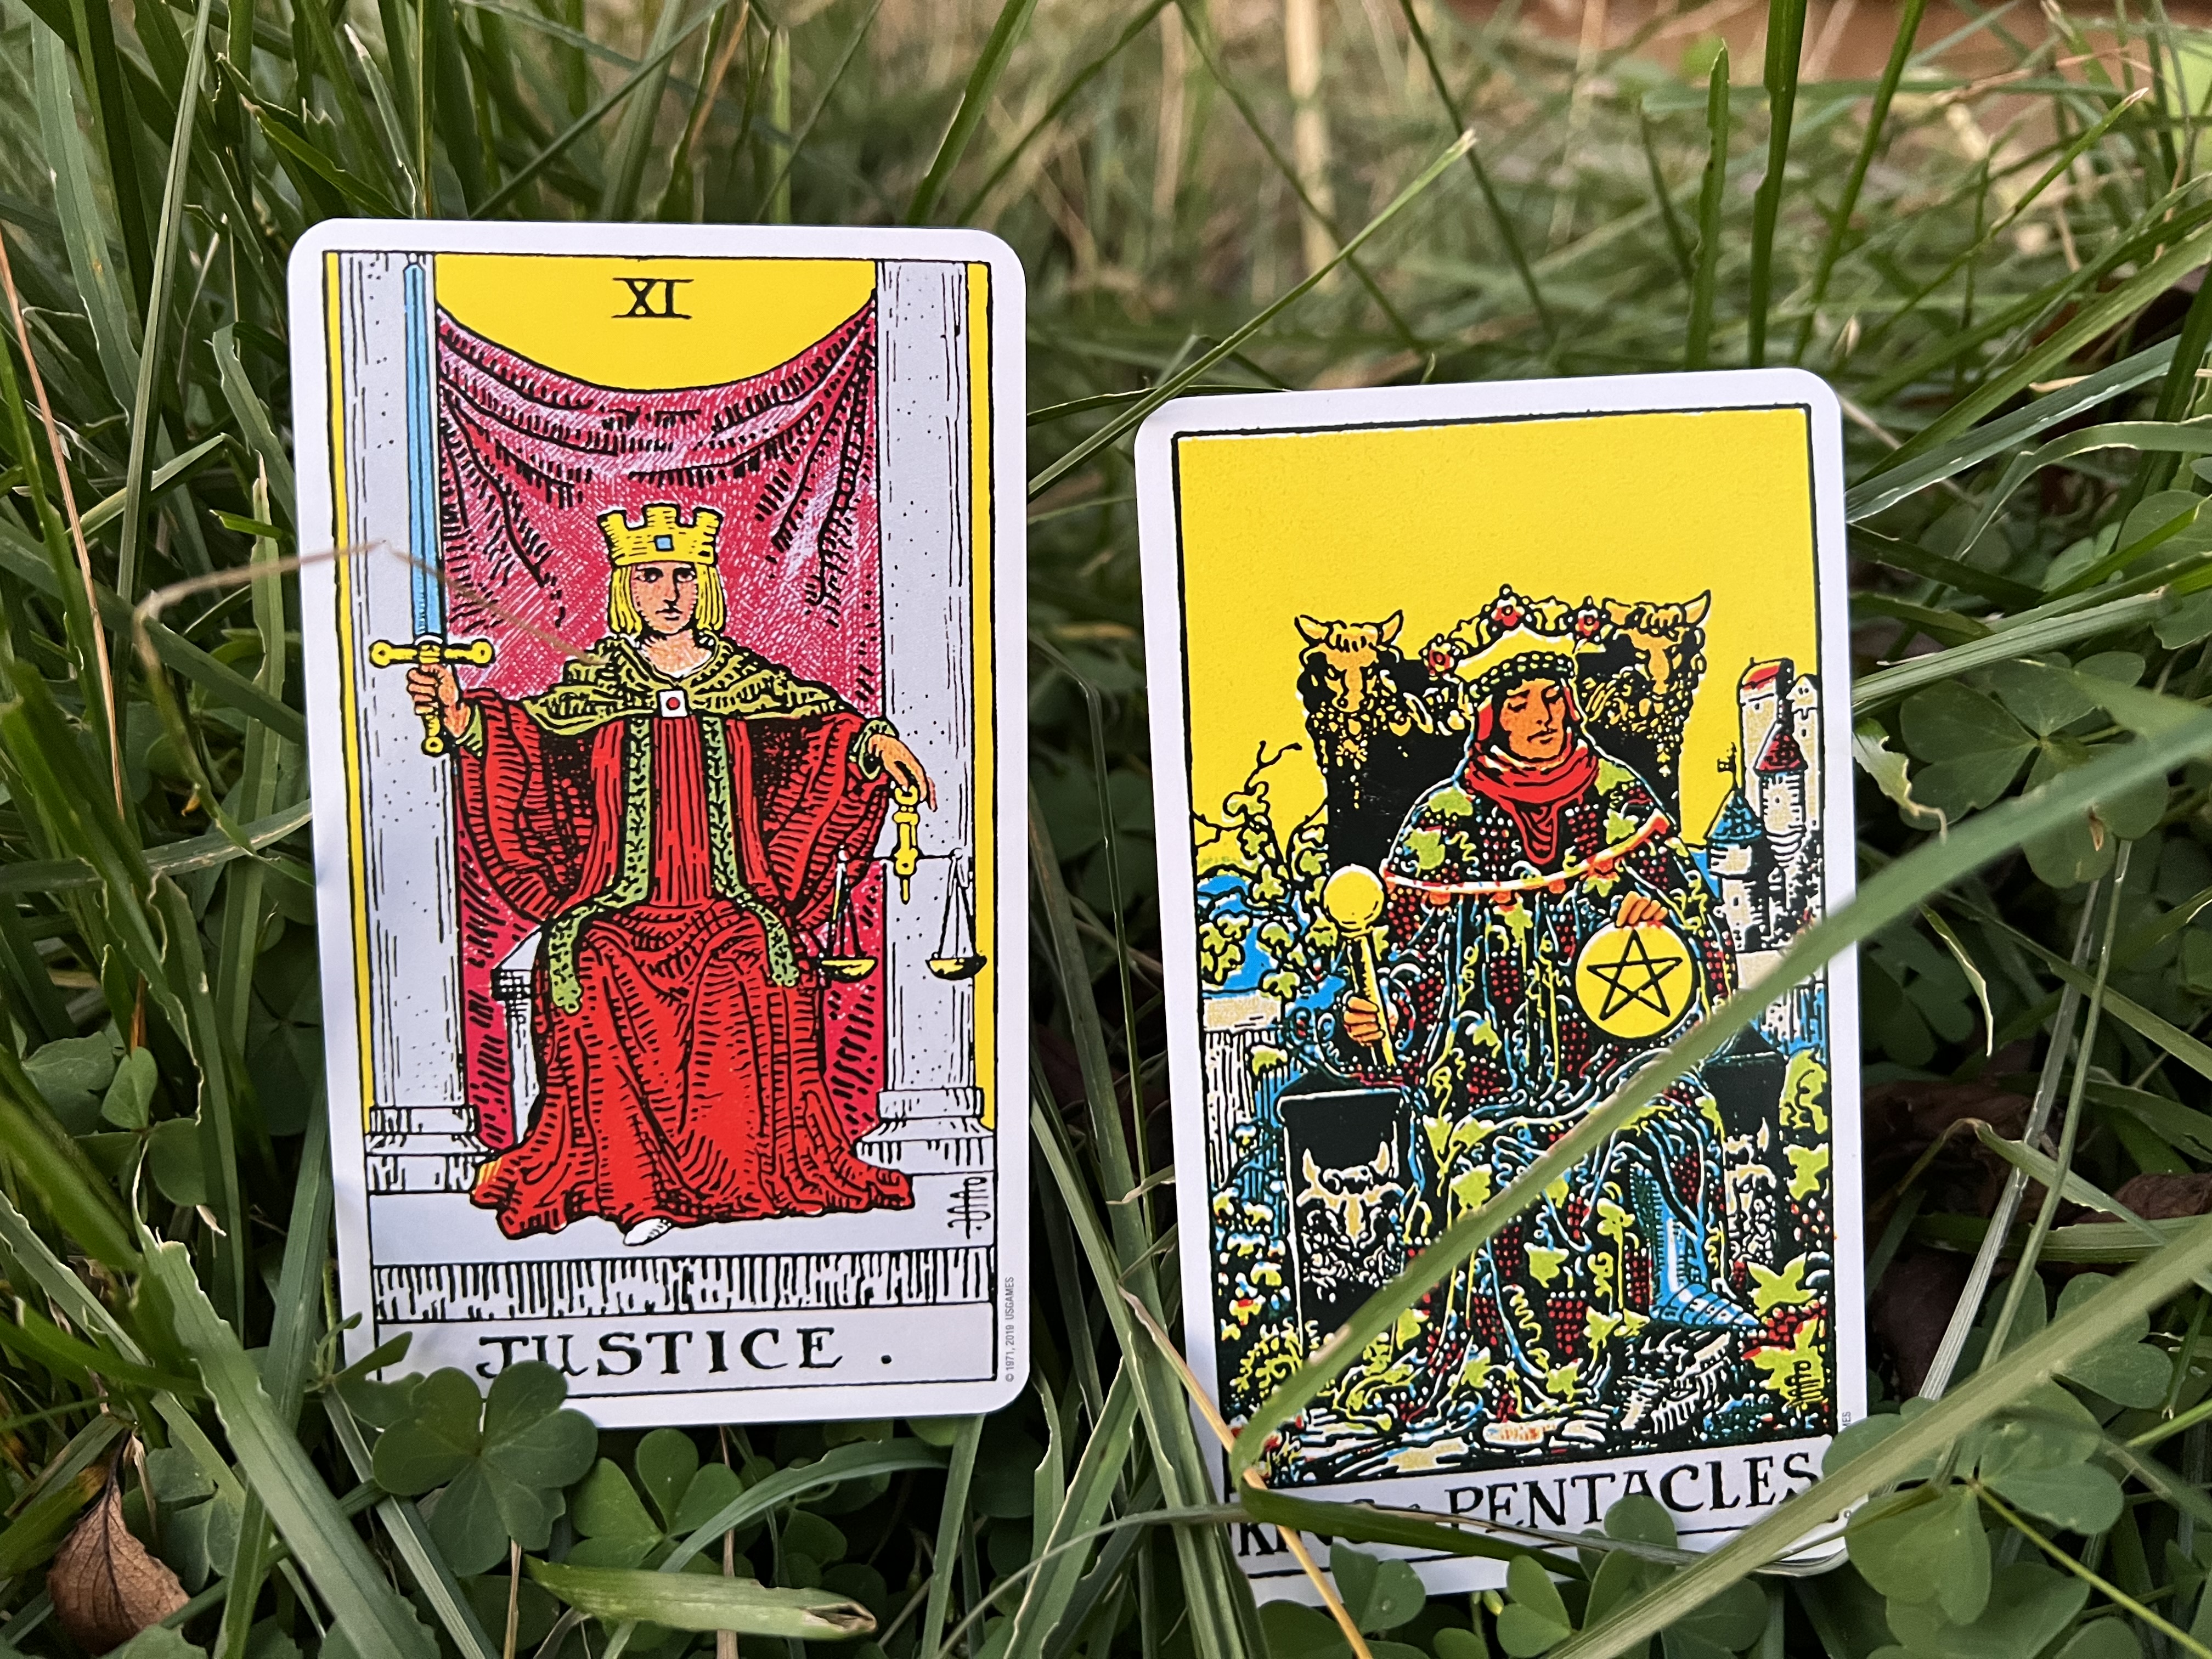 Photo of the XI Justice and the King of Pentacles cards from the Rider Waite Tarot Deck in the grass